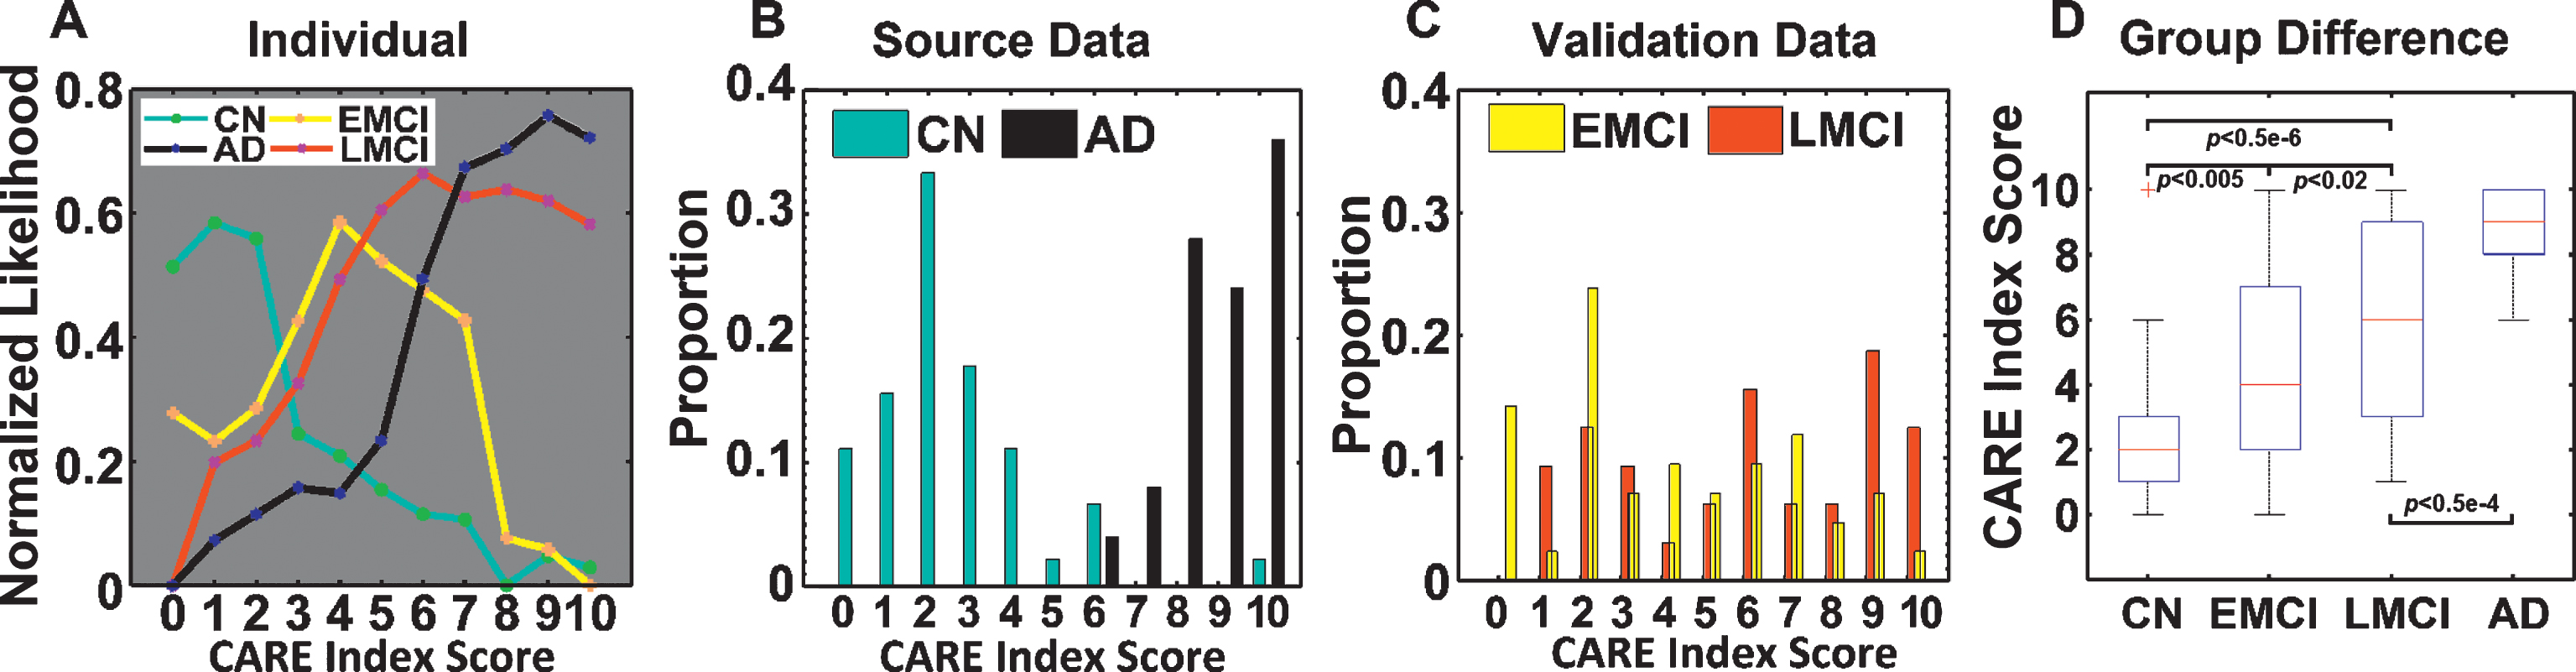 CARE index associated with AD clinical stages. A) Normalized likelihoods across the CARE index. The cyan, yellow, red, and black lines represent the likelihoods at each score on the CARE index for a CN subject, an EMCI subject, an LMCI subject, and an AD subject, respectively. B) CARE index distribution in CN and AD groups calculated from the EBP model. The CARE index is ordered by the maximum likelihood event sequence. Each score on the CARE index corresponds to the occurrence of a biomarker event. CARE index score 0 corresponds to no events having occurred and CARE index score 10 corresponds to all events having occurred. Both CN and AD groups showed heterogeneous index distributions. C) CARE index distributions in EMCI and LMCI groups. The proportion of EMCI (yellow) and LMCI (red) subjects at each CARE index score was plotted. D) A box plot of the CARE index score differences between groups. The median CARE index scores for CN, EMCI, LMCI, and AD groups are 2, 4, 6, and 9, respectively. The two-sample t-tests between CN and EMCI, CN and LMCI, EMCI and LMCI, and AD and LMCI showed significant differences. The red “+” denotes an outlier in the CN group.